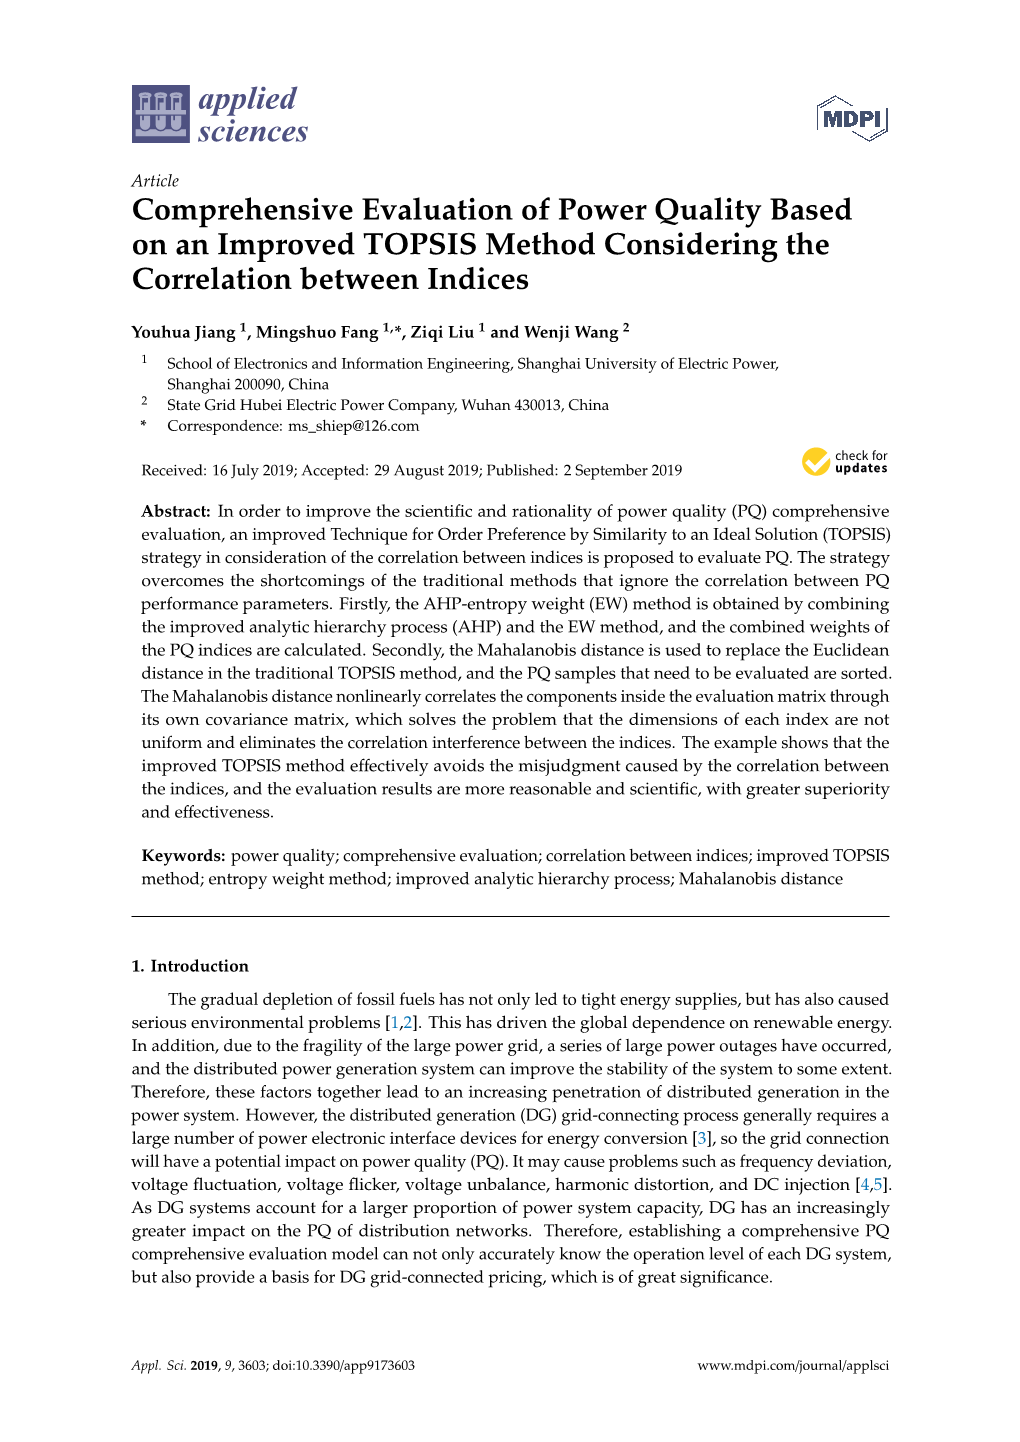 Comprehensive Evaluation of Power Quality Based on an Improved TOPSIS Method Considering the Correlation Between Indices